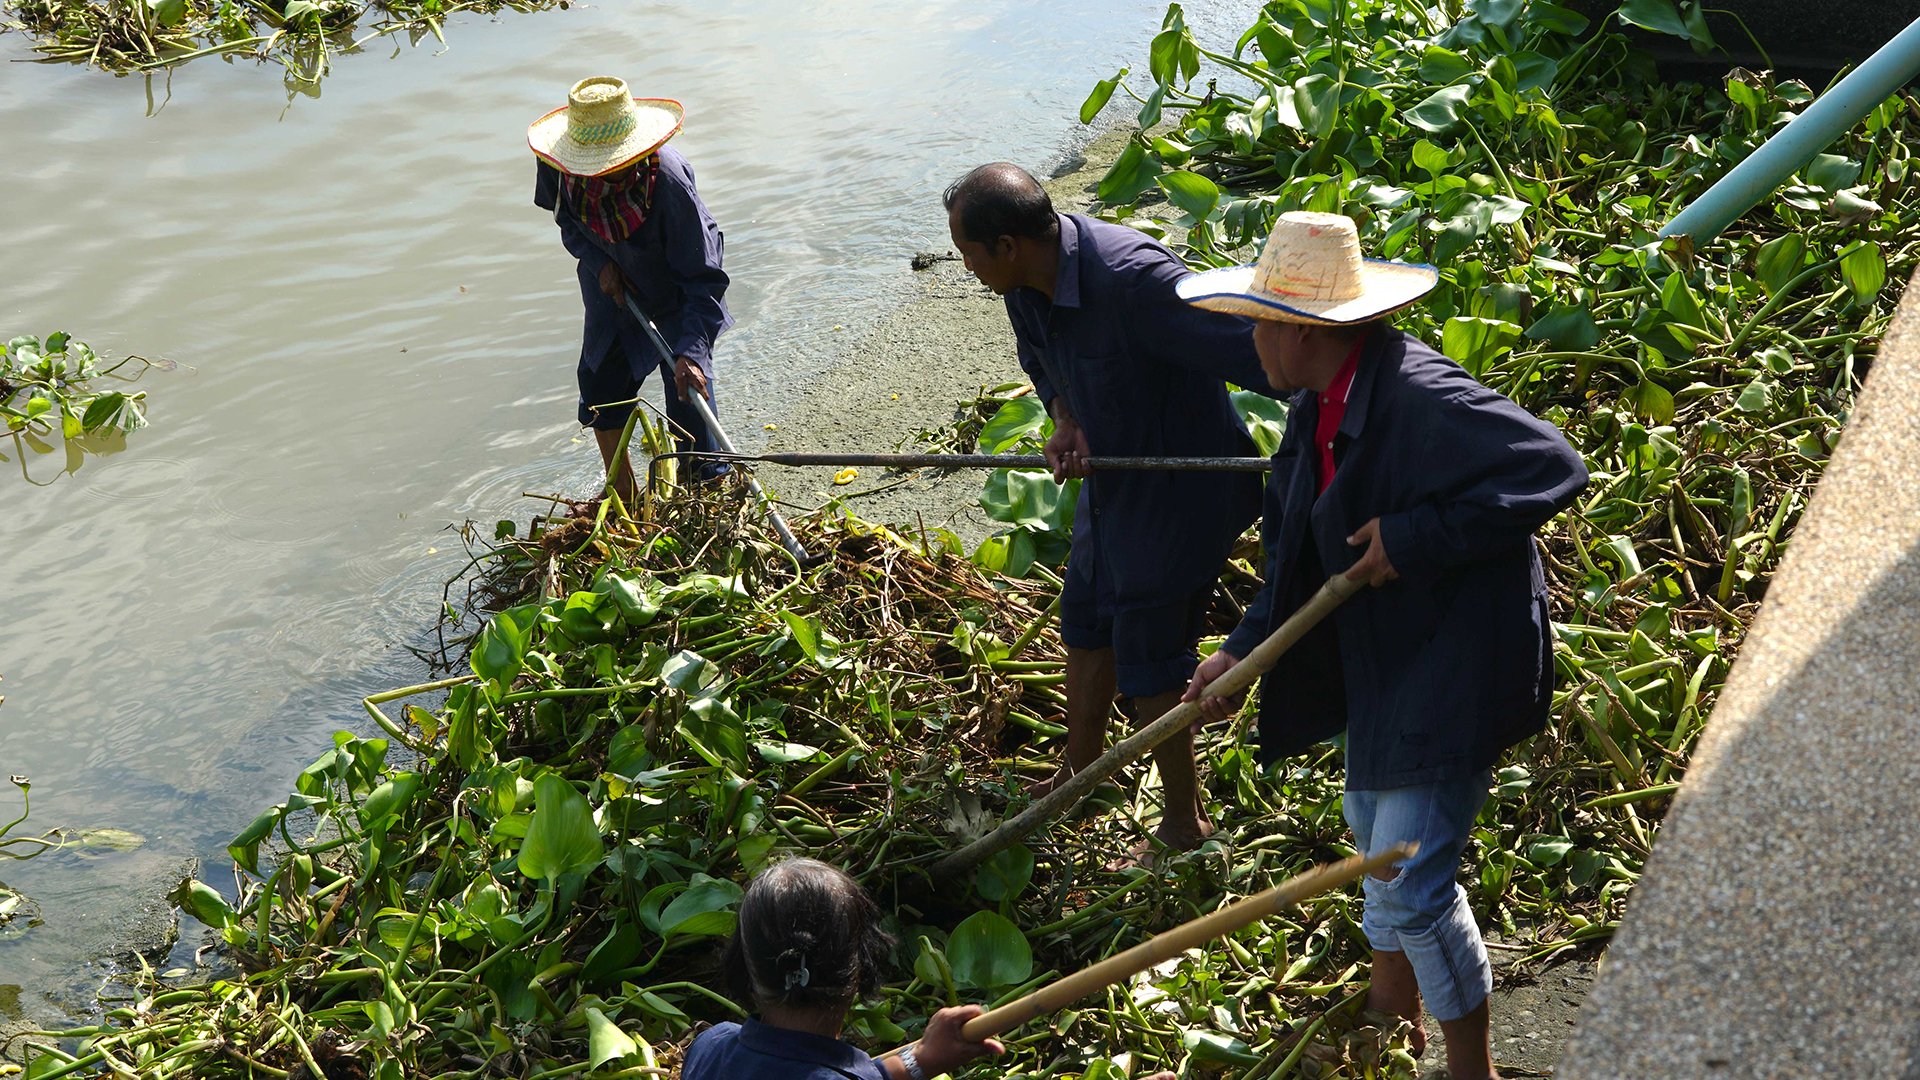 Removal of invasive water hyacinth from the Pa Sak river, Thailand